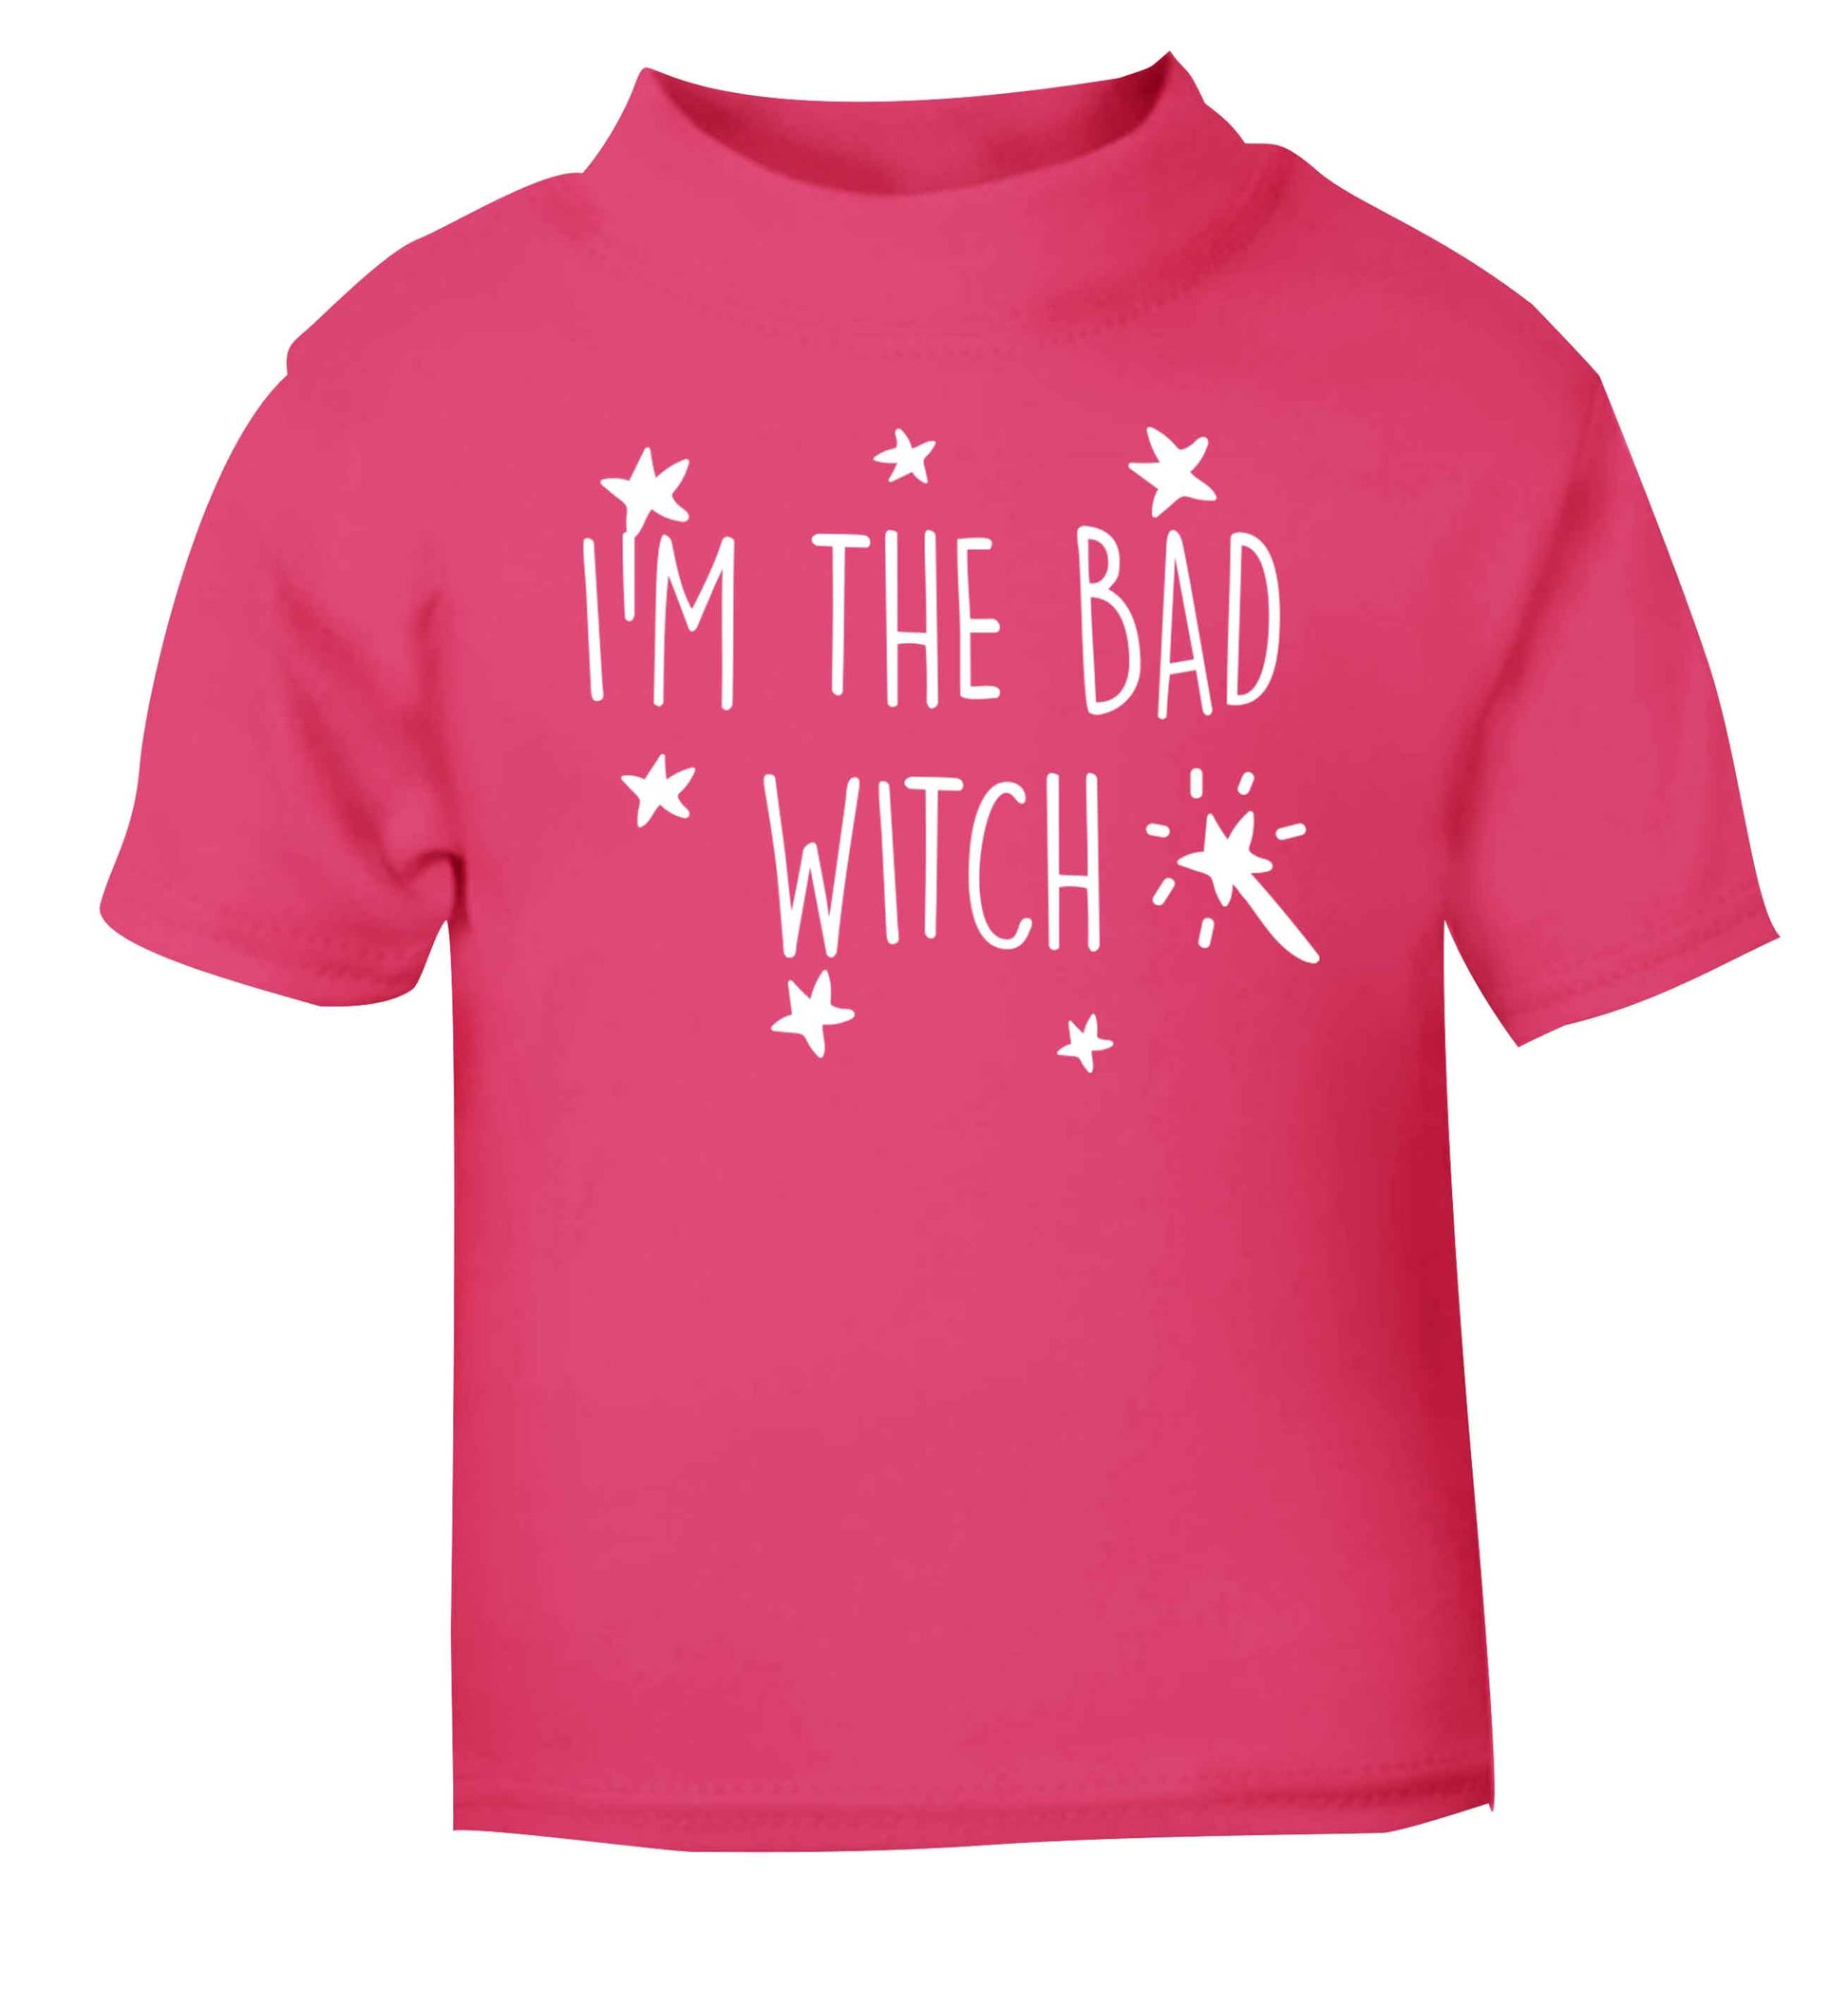 Bad witch pink baby toddler Tshirt 2 Years